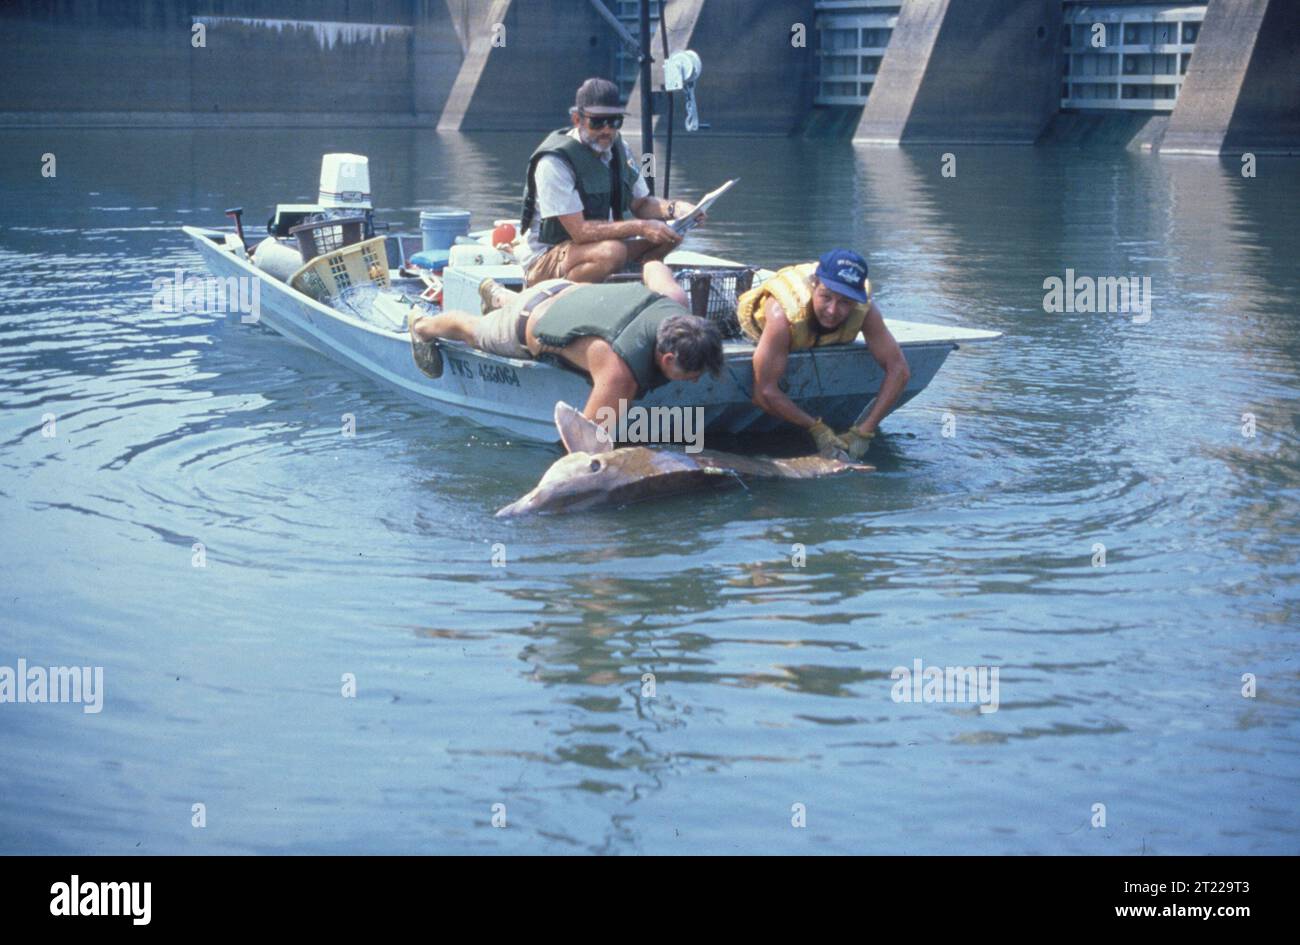 A group of men work on catching an endangered sturgeon on the Apalachicola River in Florida. Subjects: Fishes; Fishing; Endangered species. Location: Florida.  . 1998 - 2011. Stock Photo